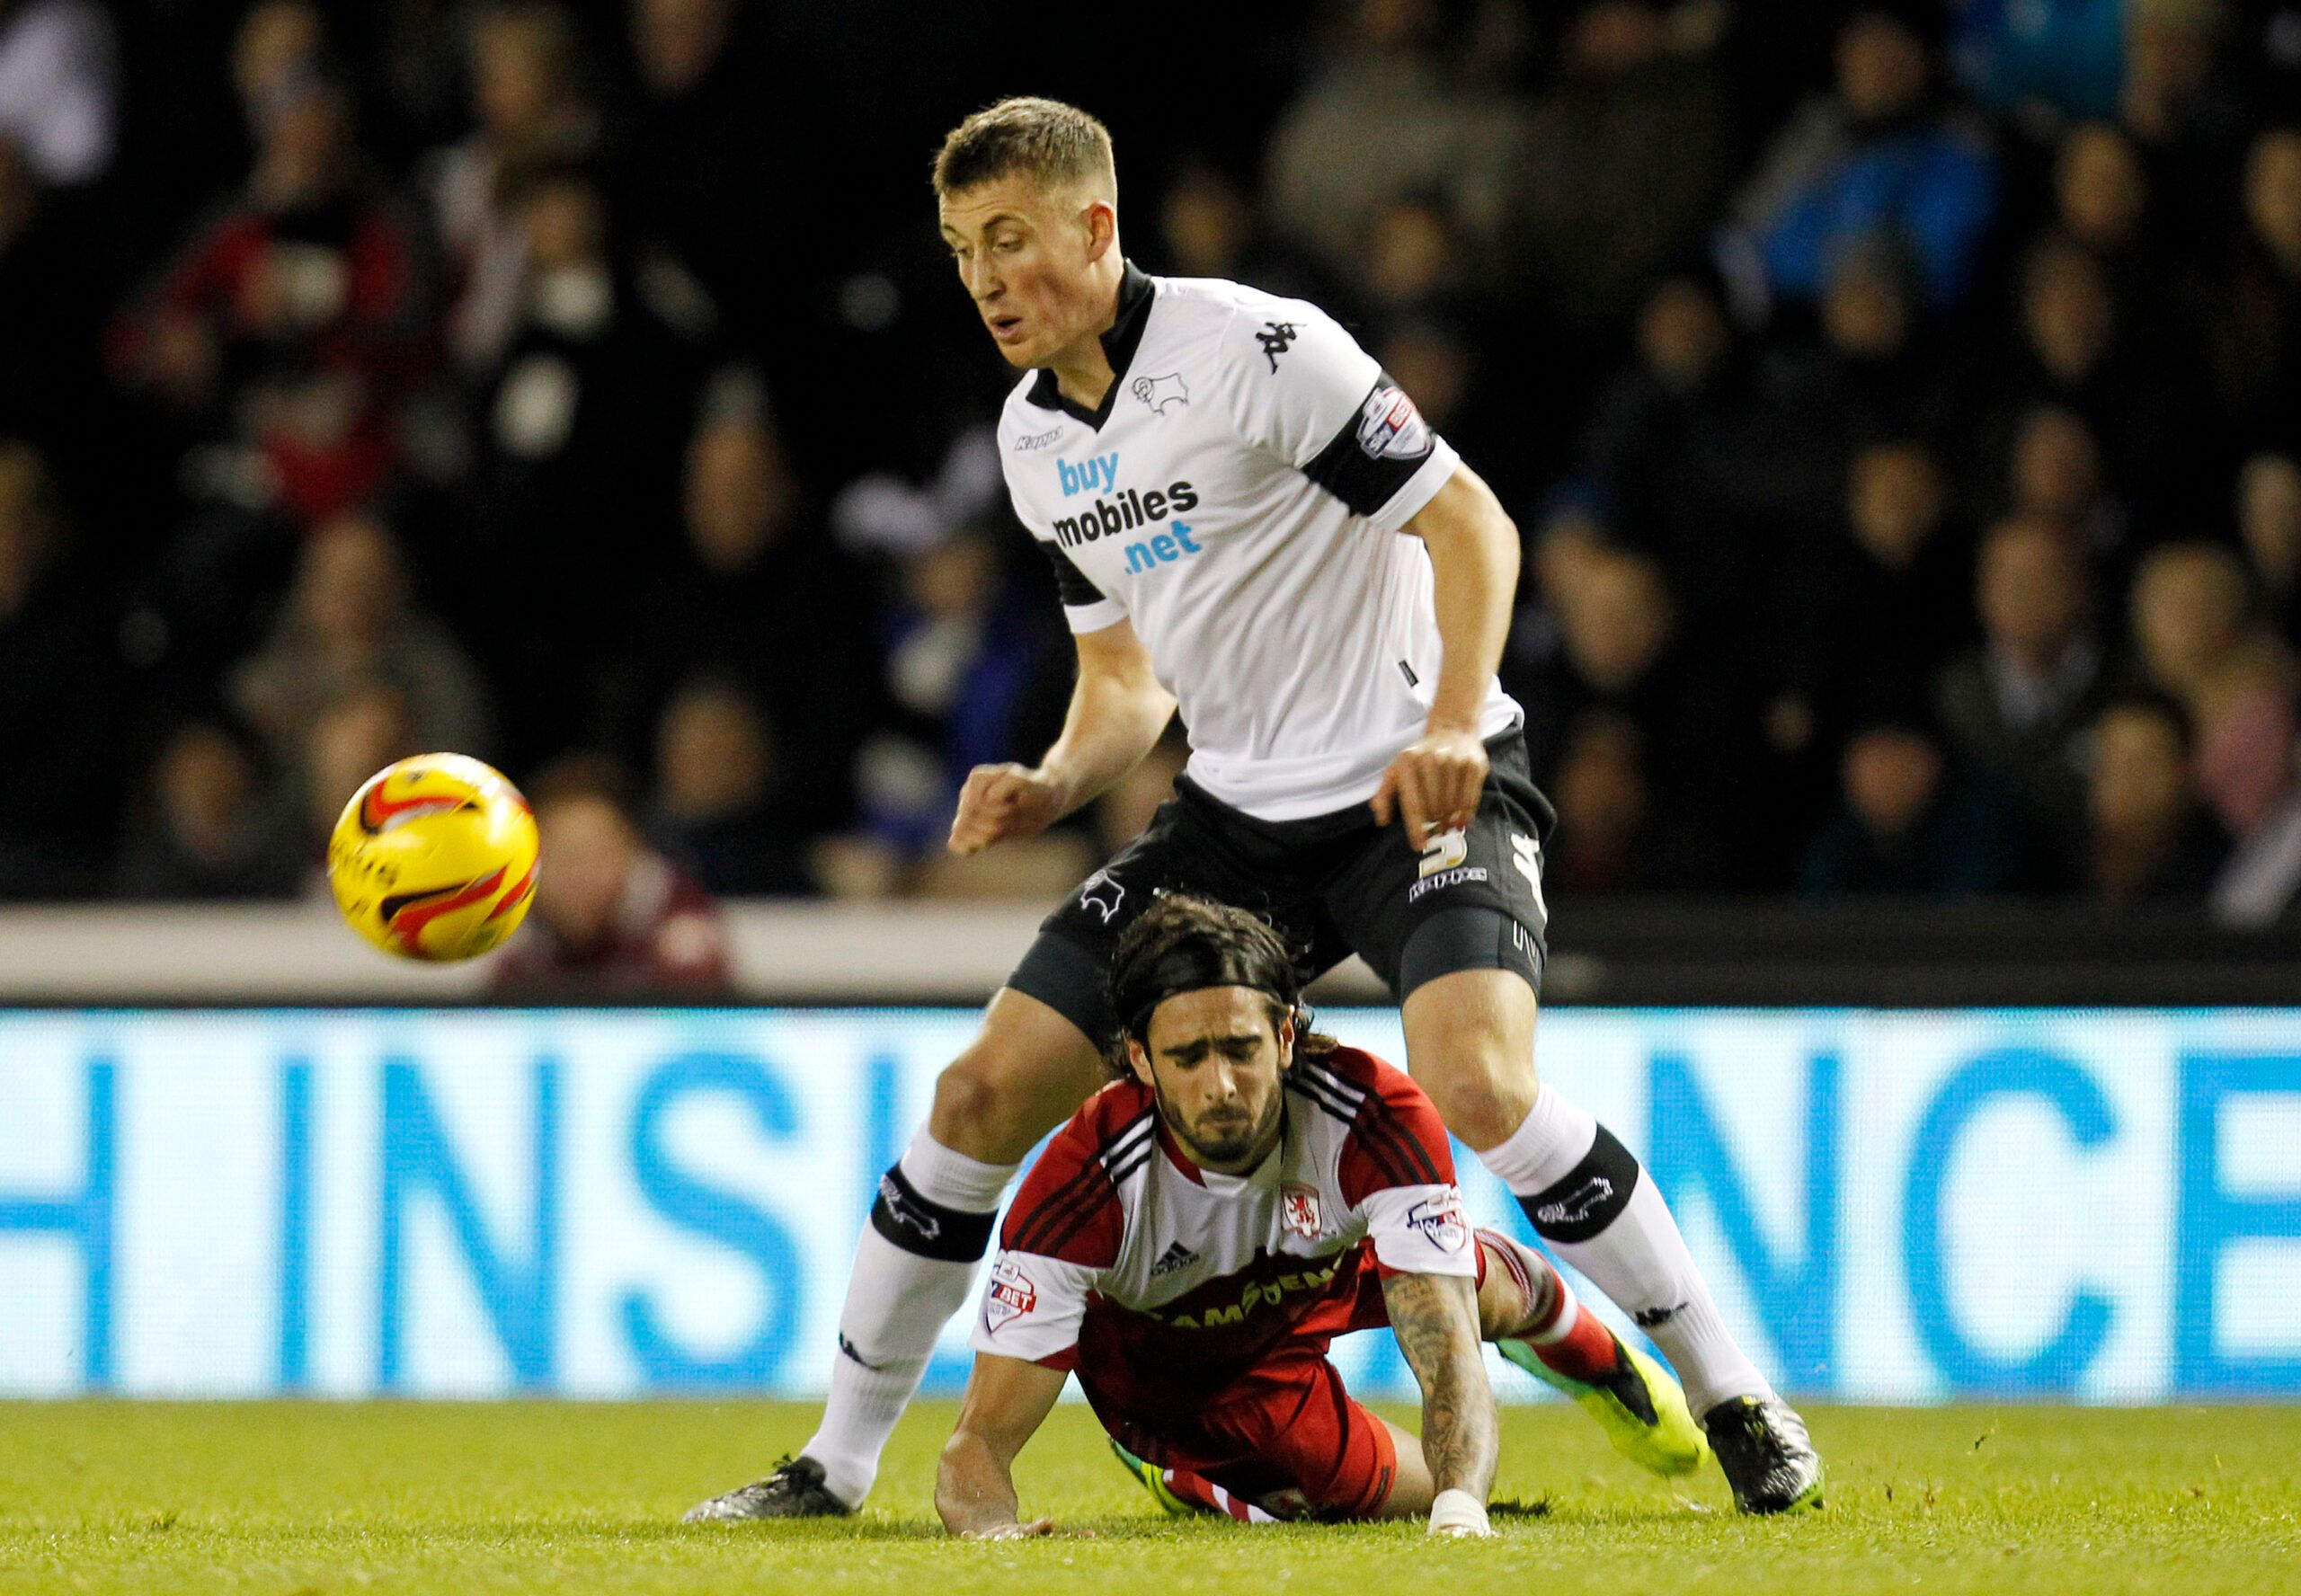 Football - Derby County v Middlesbrough - Sky Bet Football League Championship - Pride Park - 4/12/13 
Middlesbrough's Rhys Williams (R) in action with Derby's Craig Forysth 
Mandatory Credit: Action Images / Jed Leicester 
Livepic 
EDITORIAL USE ONLY. No use with unauthorized audio, video, data, fixture lists, club/league logos or live services. Online in-match use limited to 45 images, no video emulation. No use in betting, games or single club/league/player publications.  Please contact your 